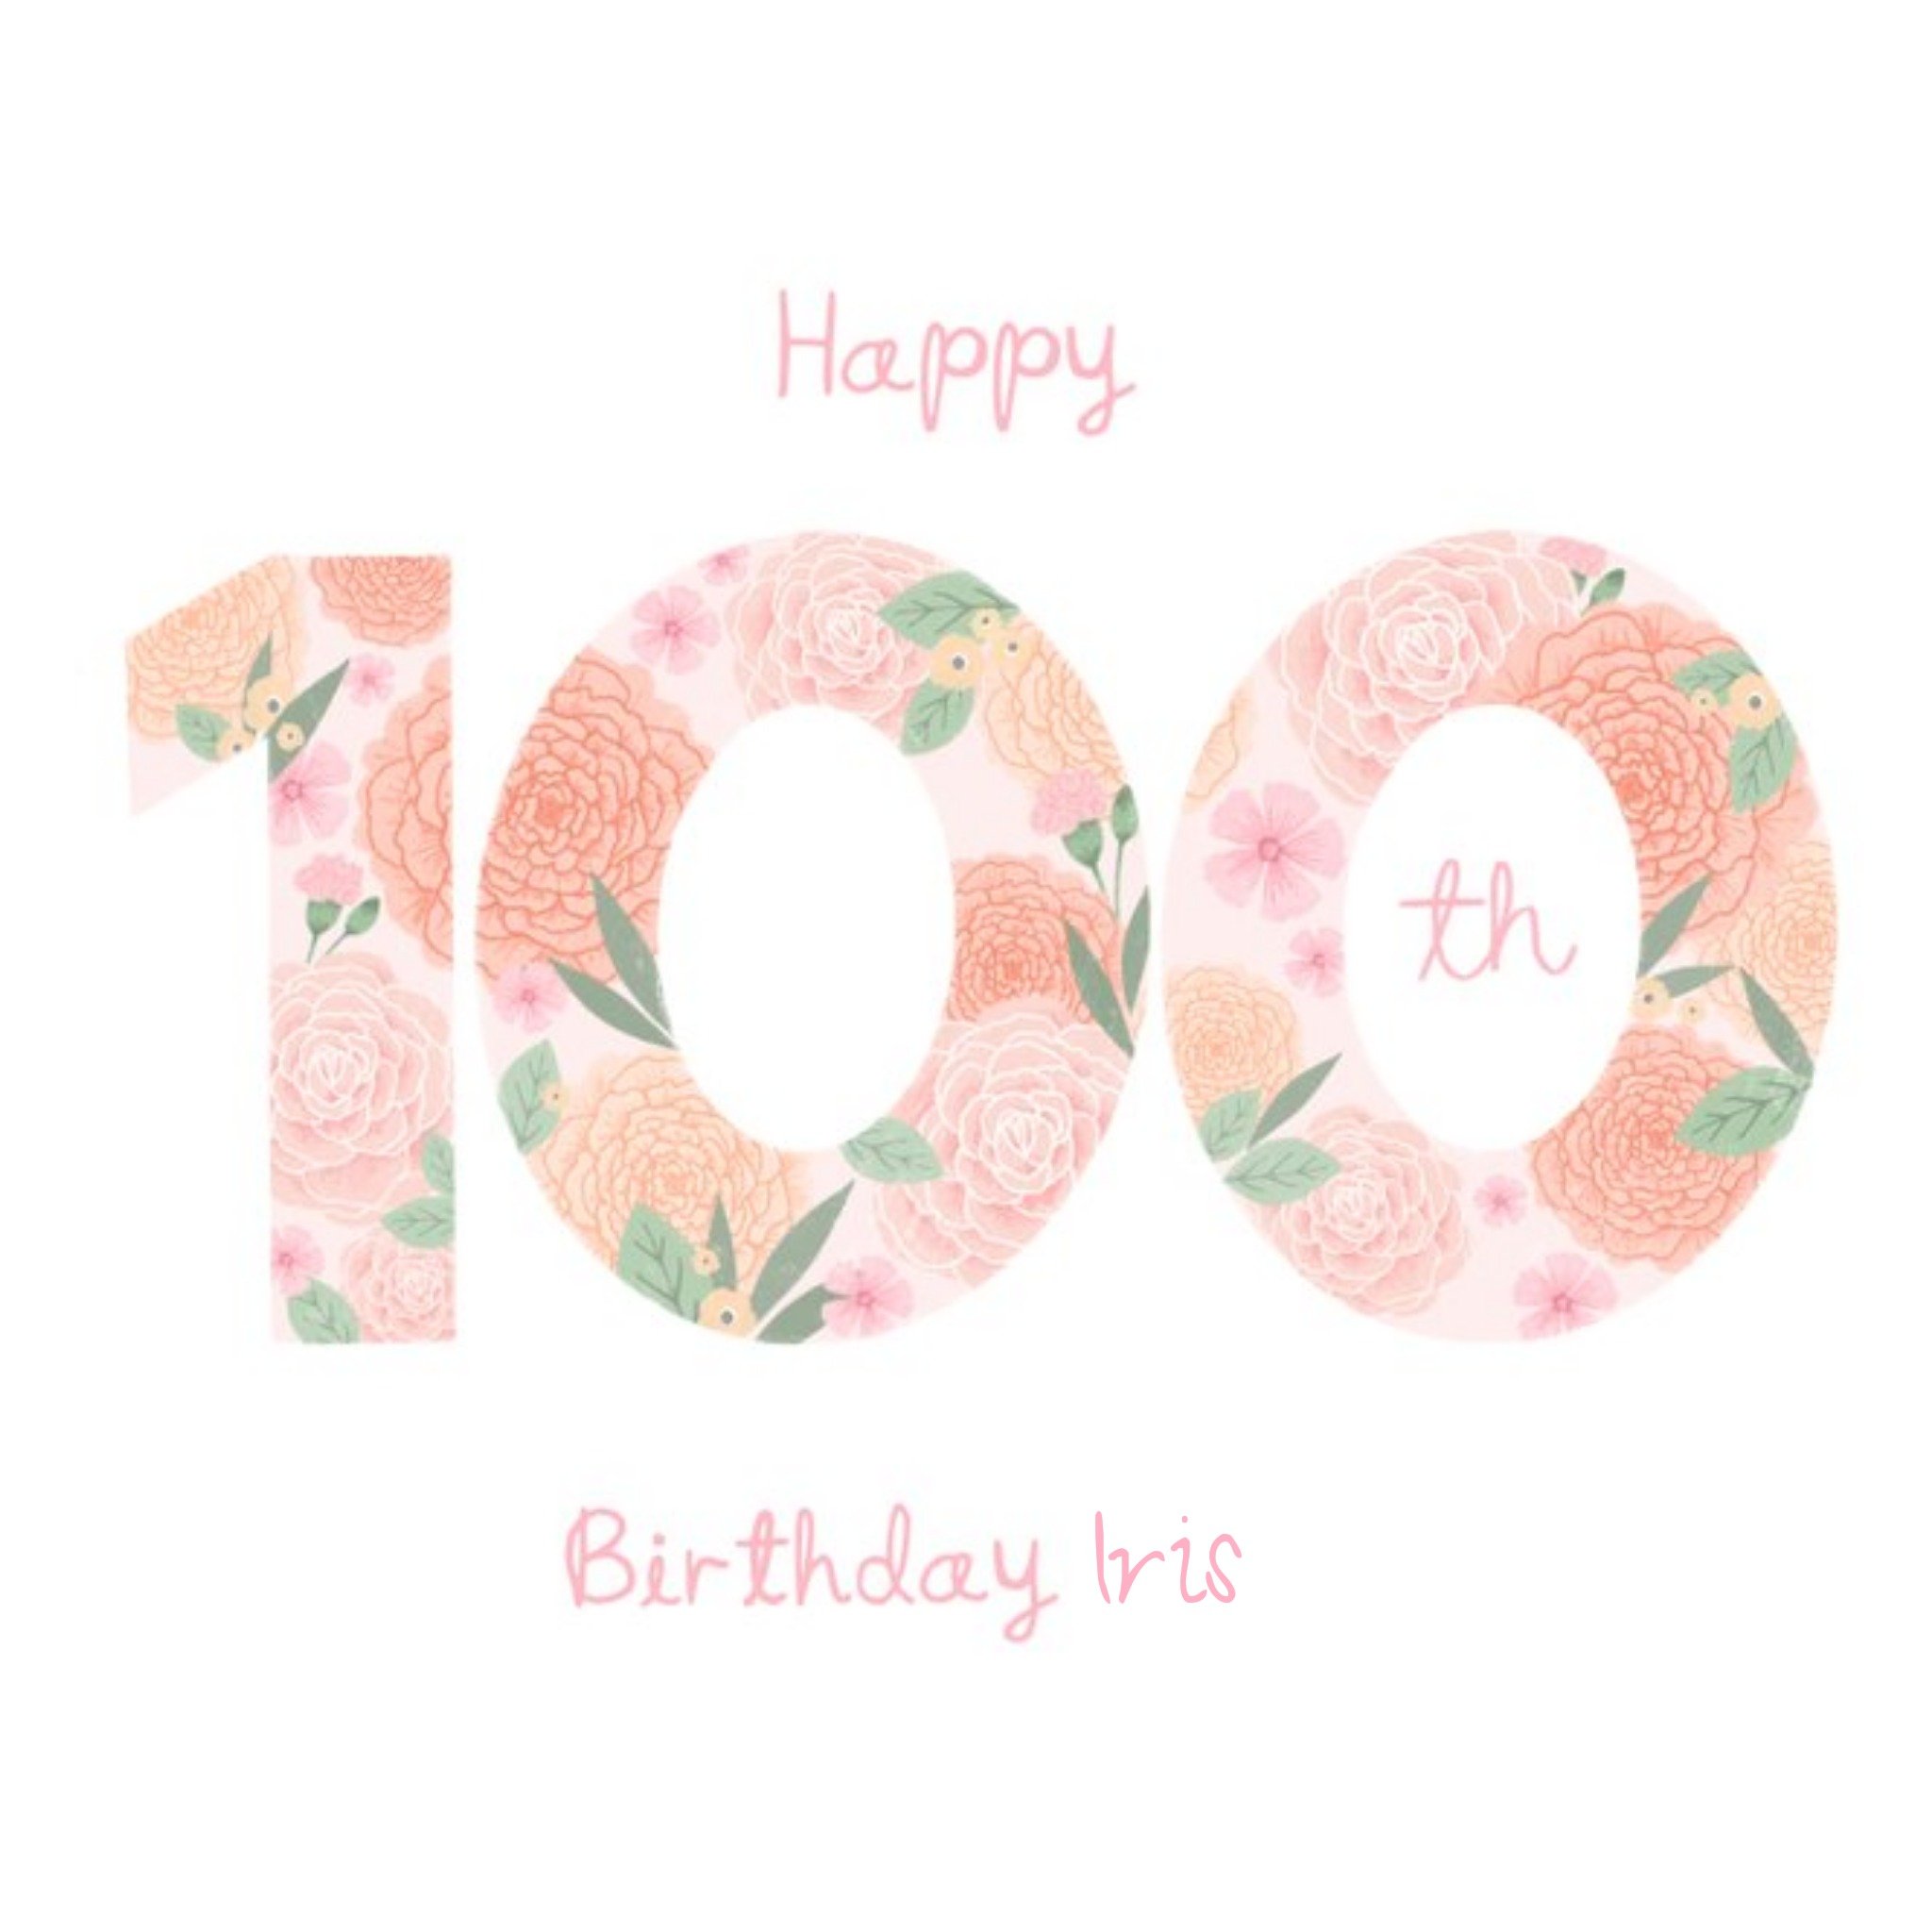 Moonpig Floral Pattern Illustration One Hundredth Personalised Birthday Card, Square